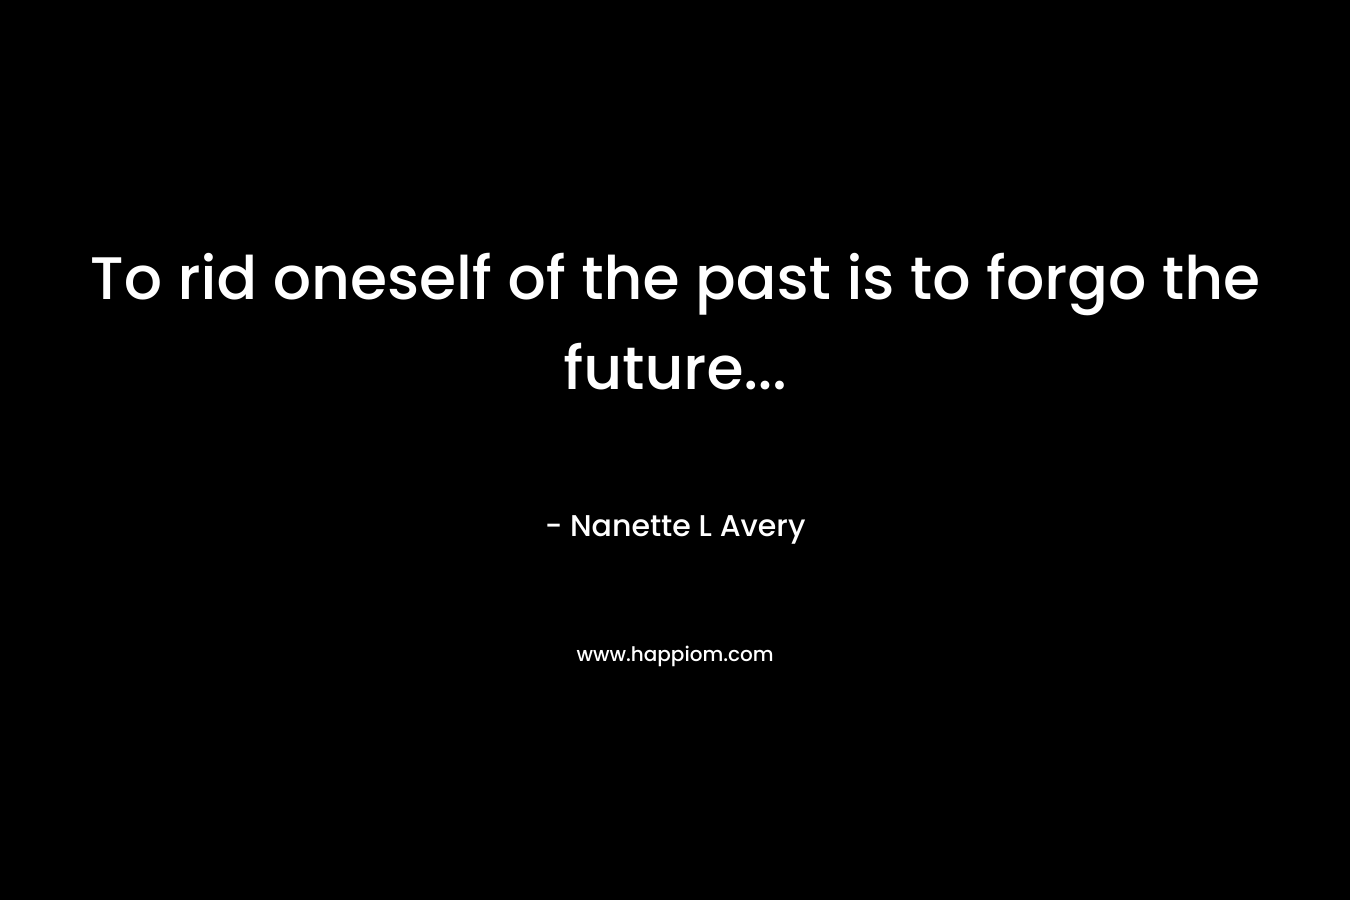 To rid oneself of the past is to forgo the future...